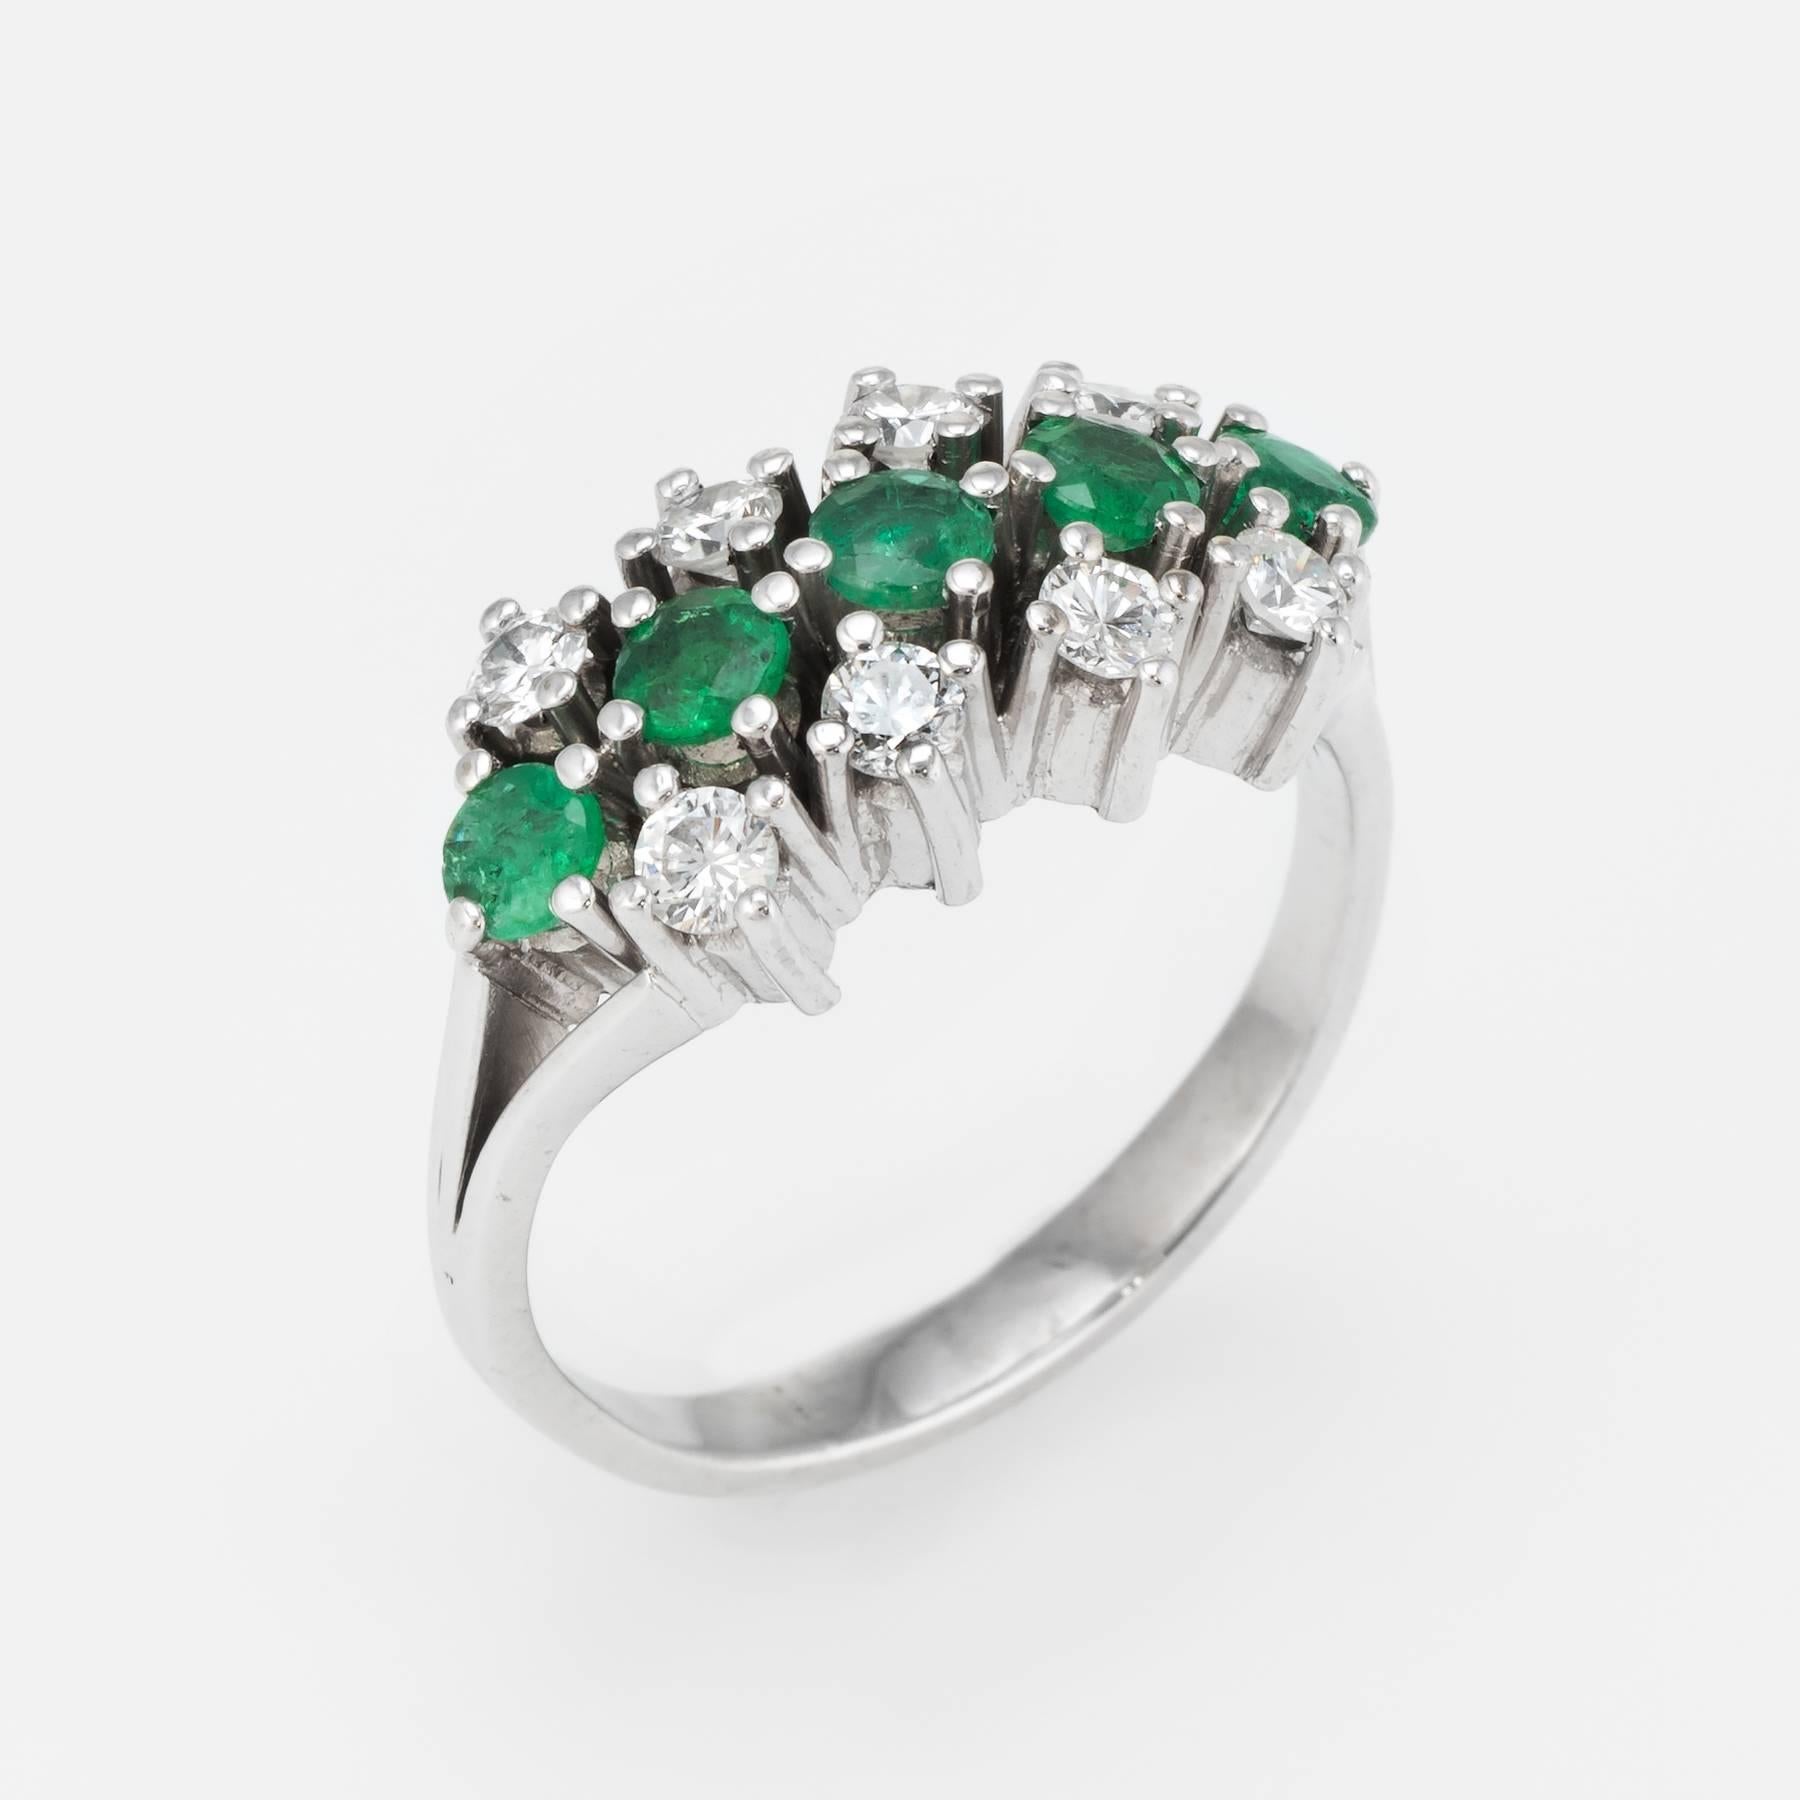 Elegant vintage anniversary band (circa 1950s to 1960s), crafted in 14 karat white gold. 

Centrally mounted faceted round cut emeralds are estimated at 0.10 carats each (0.50 carats total estimated weight), accented with 8 estimated 0.05 carat